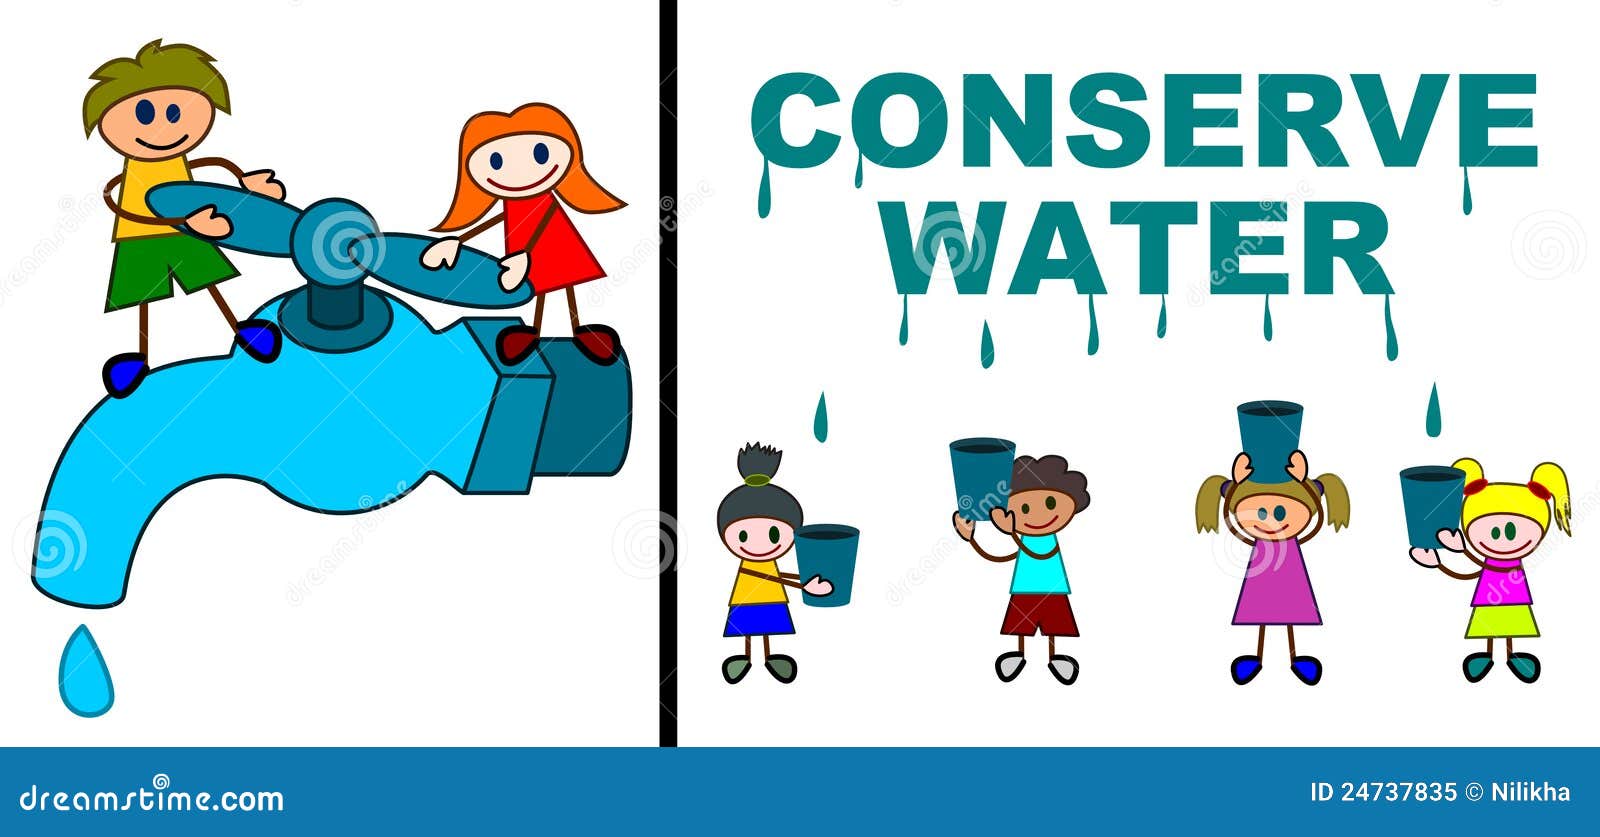 clipart water conservation - photo #40